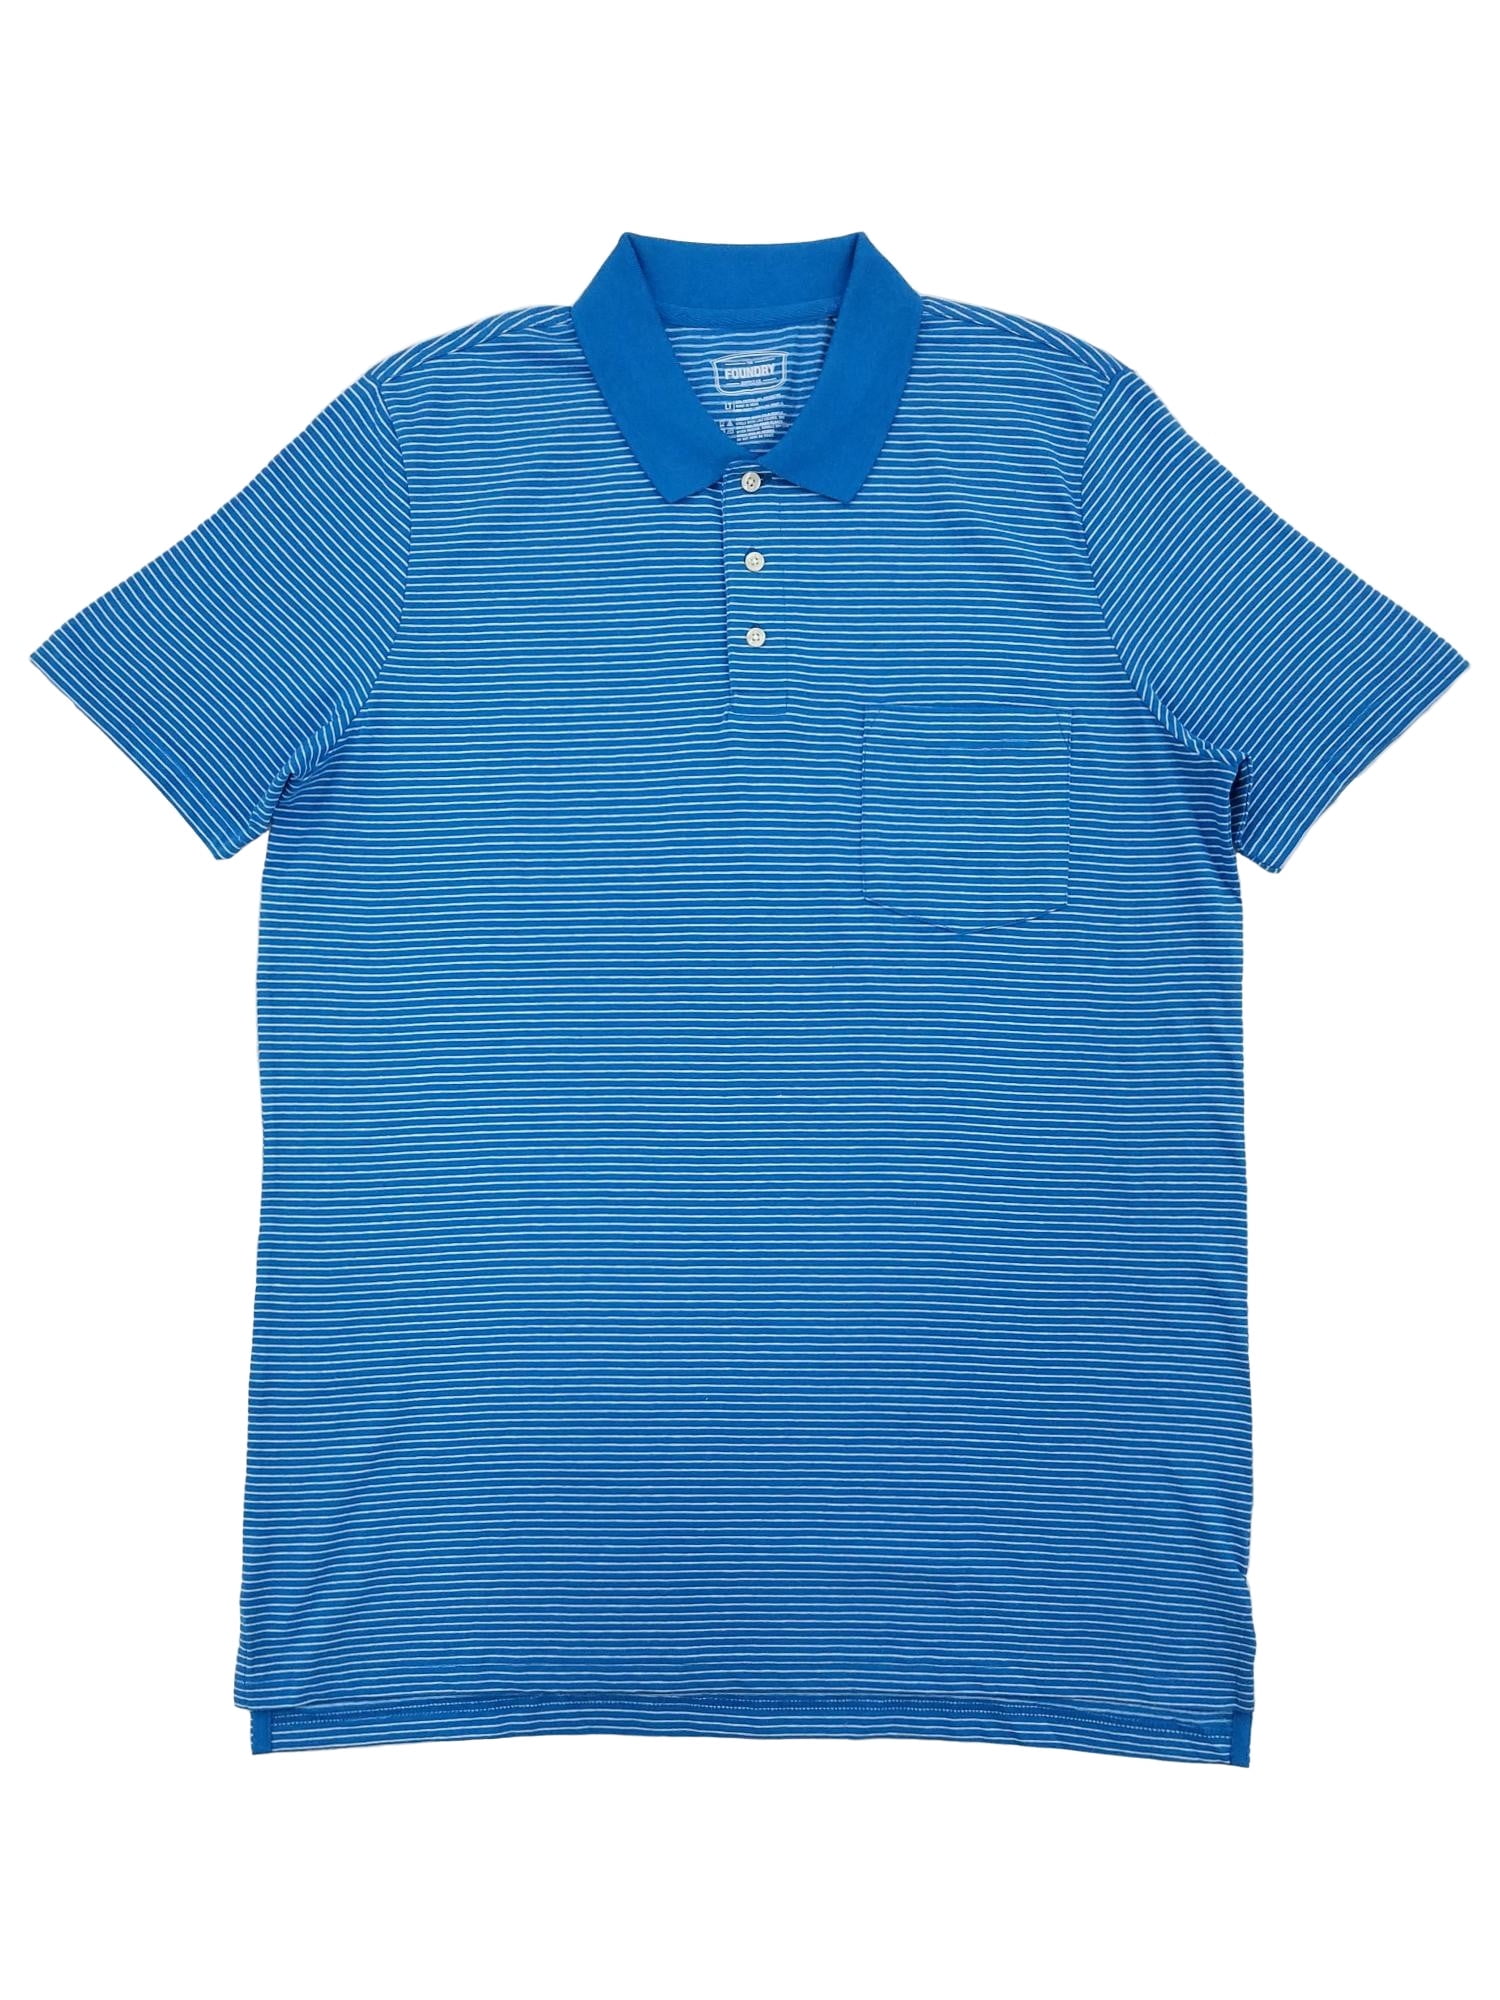 The Foundry Mens Big & Tall Blue Aster Stripe Short Sleeve Polo T-Shirt ...